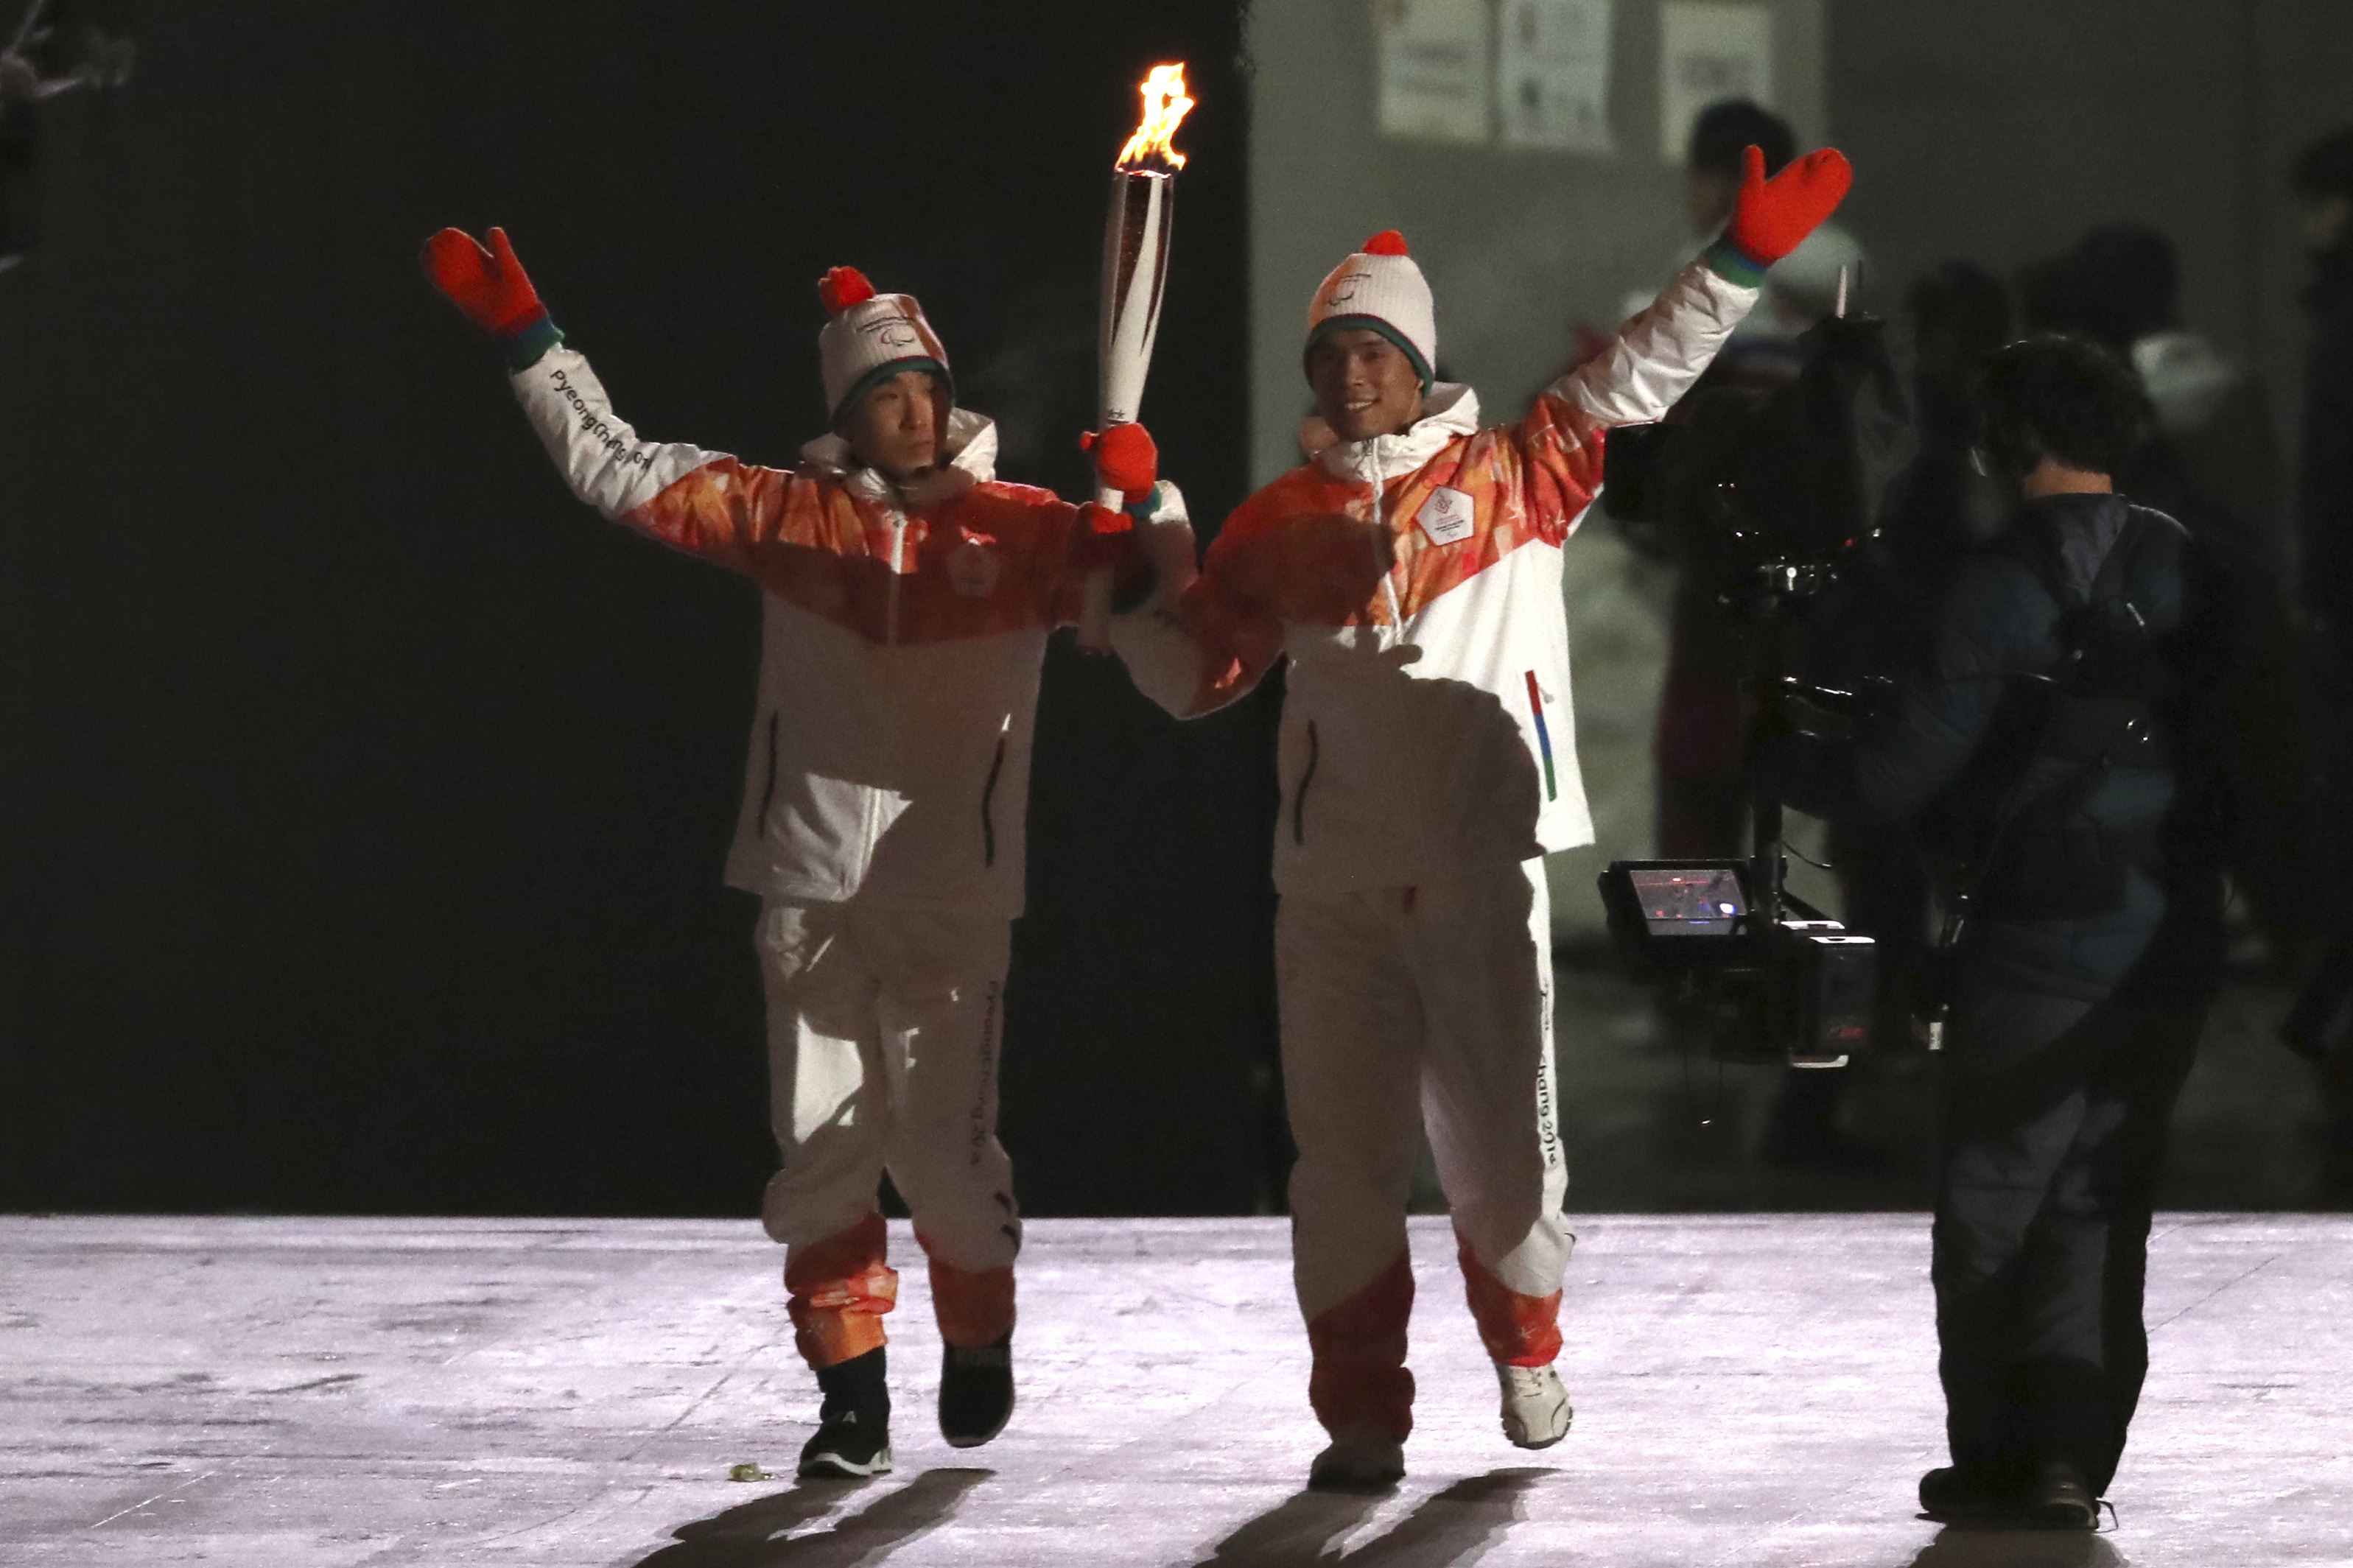 From left South Korean Paralympian Choi Bogue and North Korean Paralympian Ma Yu Chol wave as they hold the Paralympic torch together during the opening ceremony of the 2018 Winter Paralympics in Pyeongchang, South Korea, Friday, March 9, 2018. (AP Photo/Ng Han Guan)